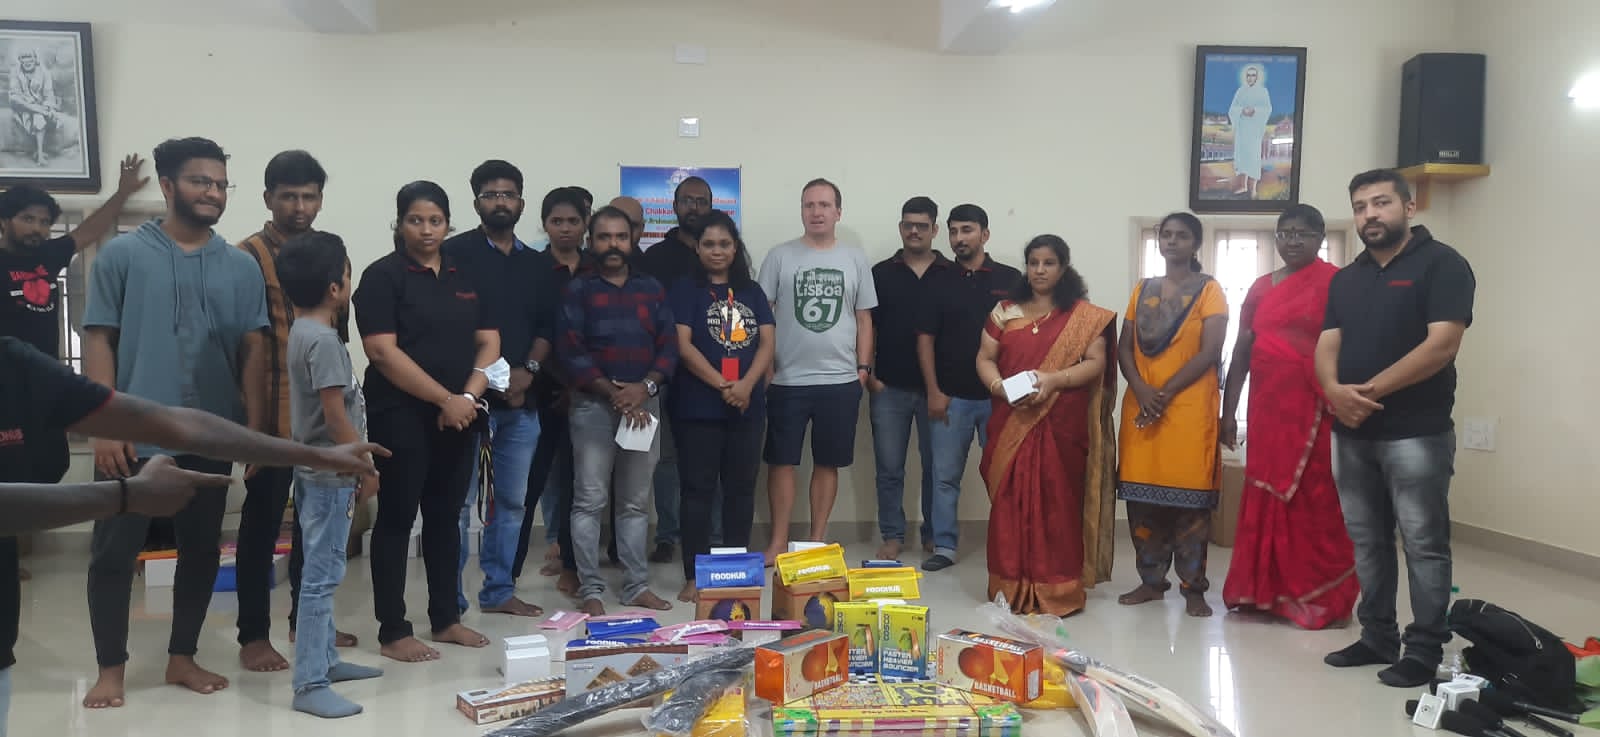 As part of their CSR (Corporate Social Responsibility) engagement program, Foodhub extended it’s repeated support to Seva Chakkara Orphanage